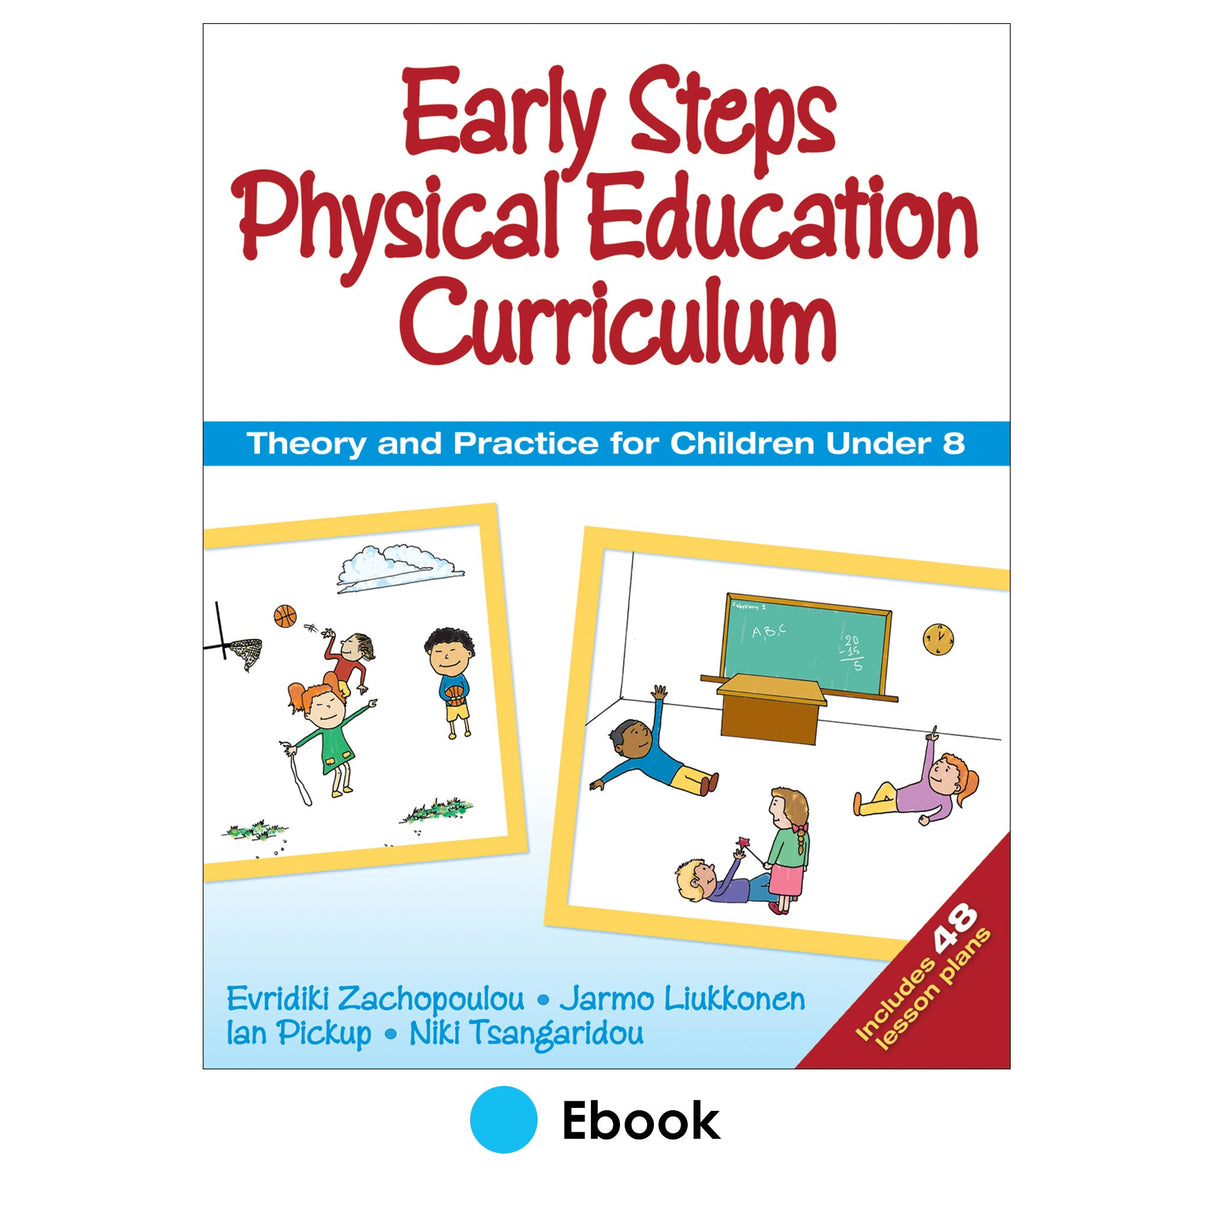 Early Steps Physical Education Curriculum PDF